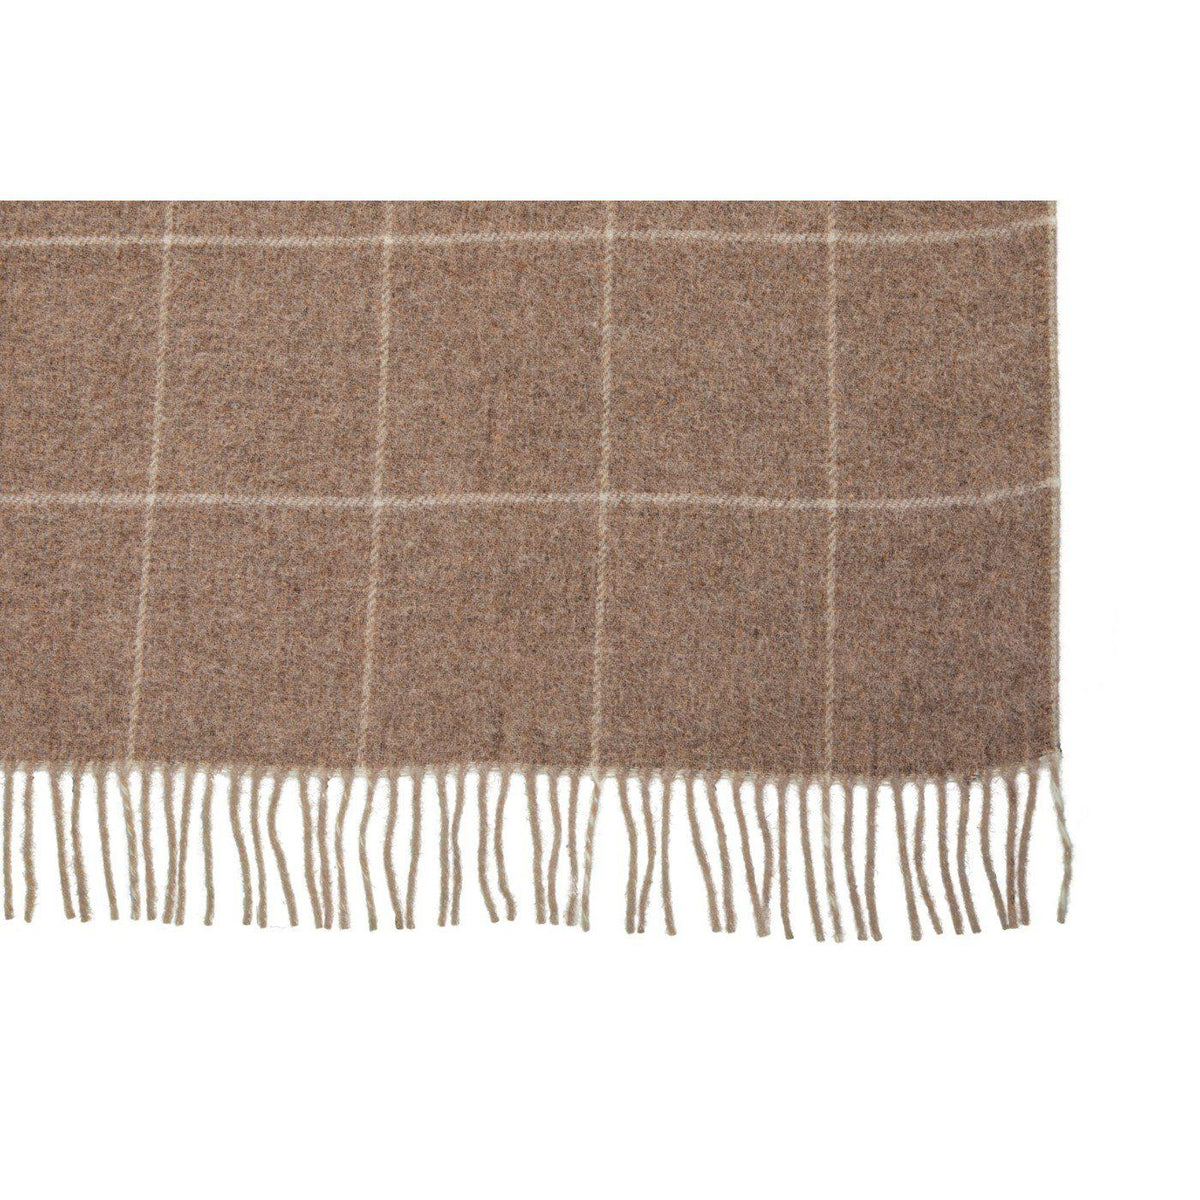 SQUARES Light Brown &amp; White Wool/Linen Throw-Fibre-Throw blankets-Artistic Elements